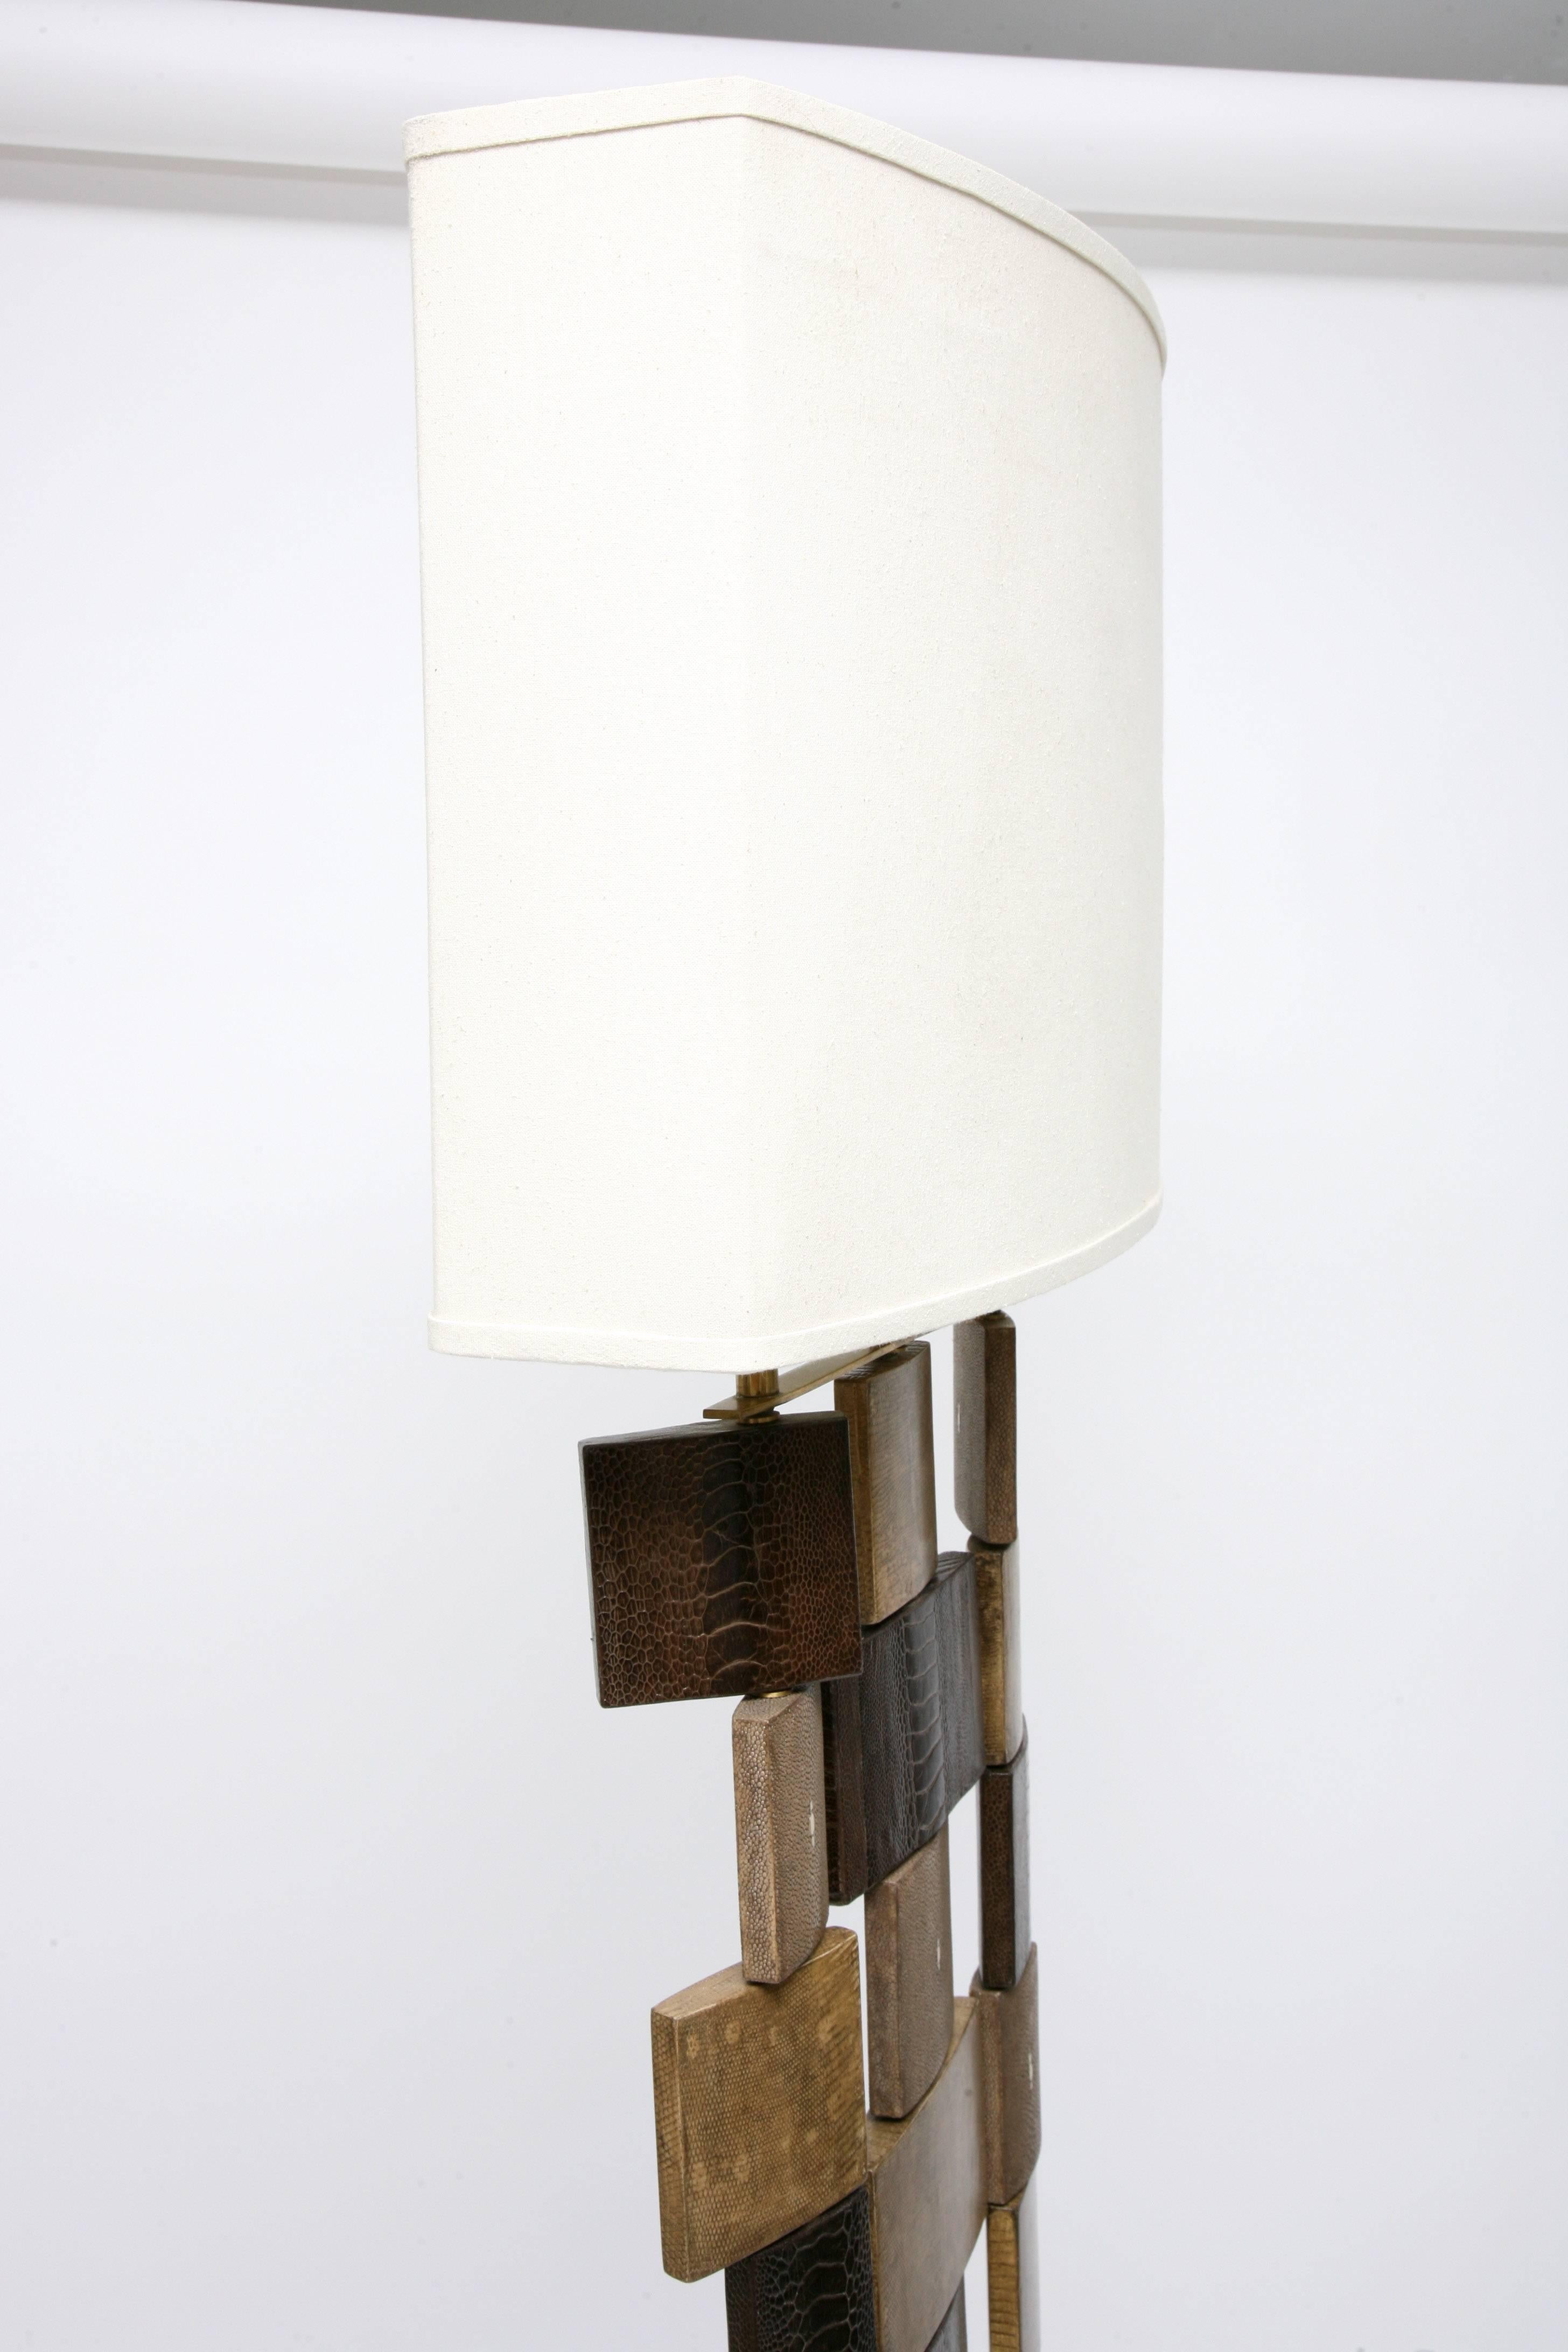 R & Y Augousti Floor Lamp, Shagreen, Alligator, Lizard and Mahogany Wood In Good Condition For Sale In West Palm Beach, FL